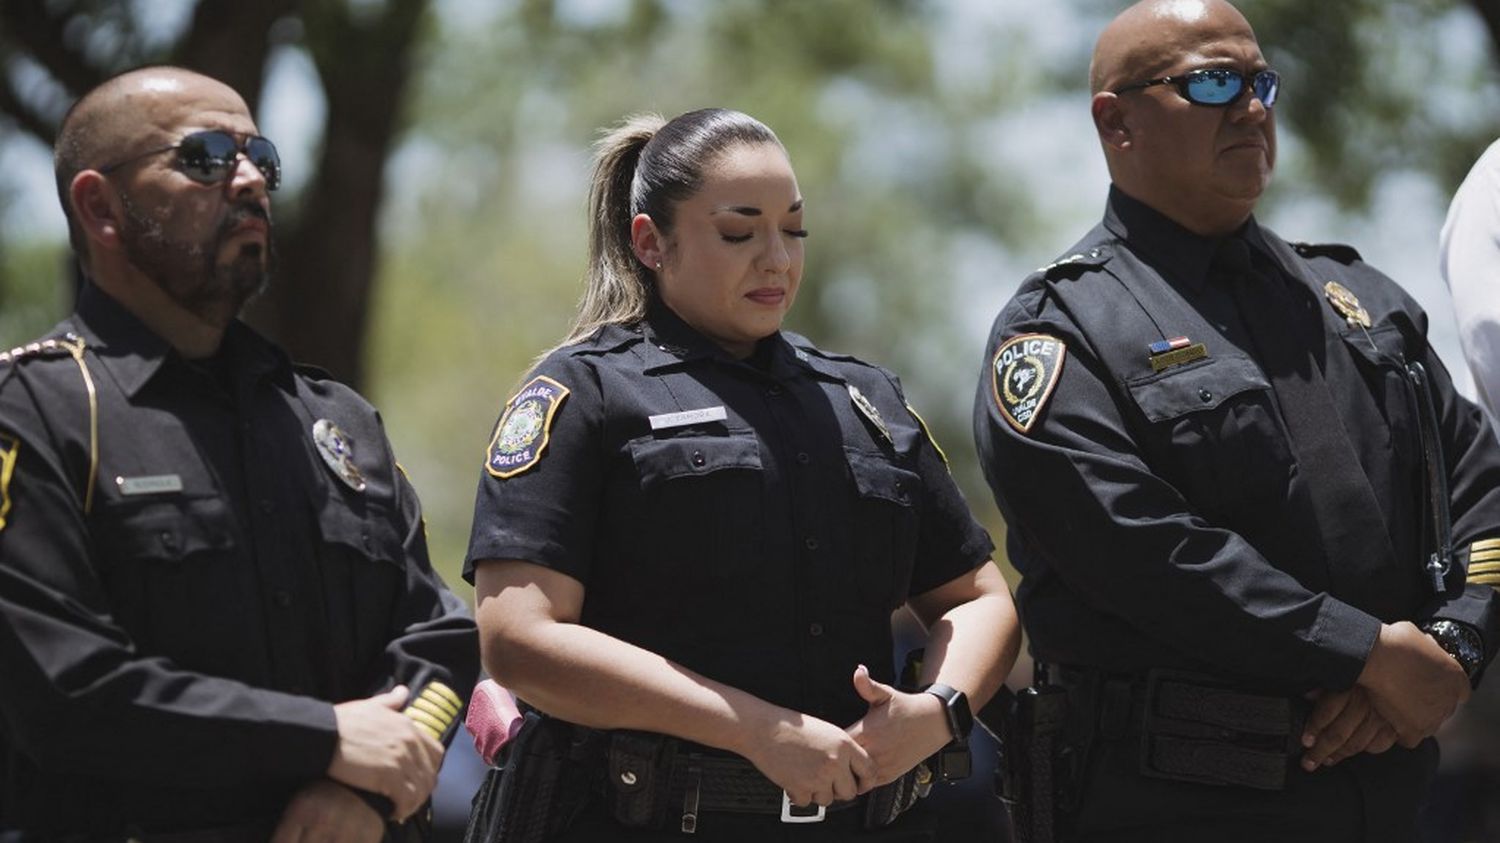 School shooting in Texas: the police officer in charge of operations suspended
